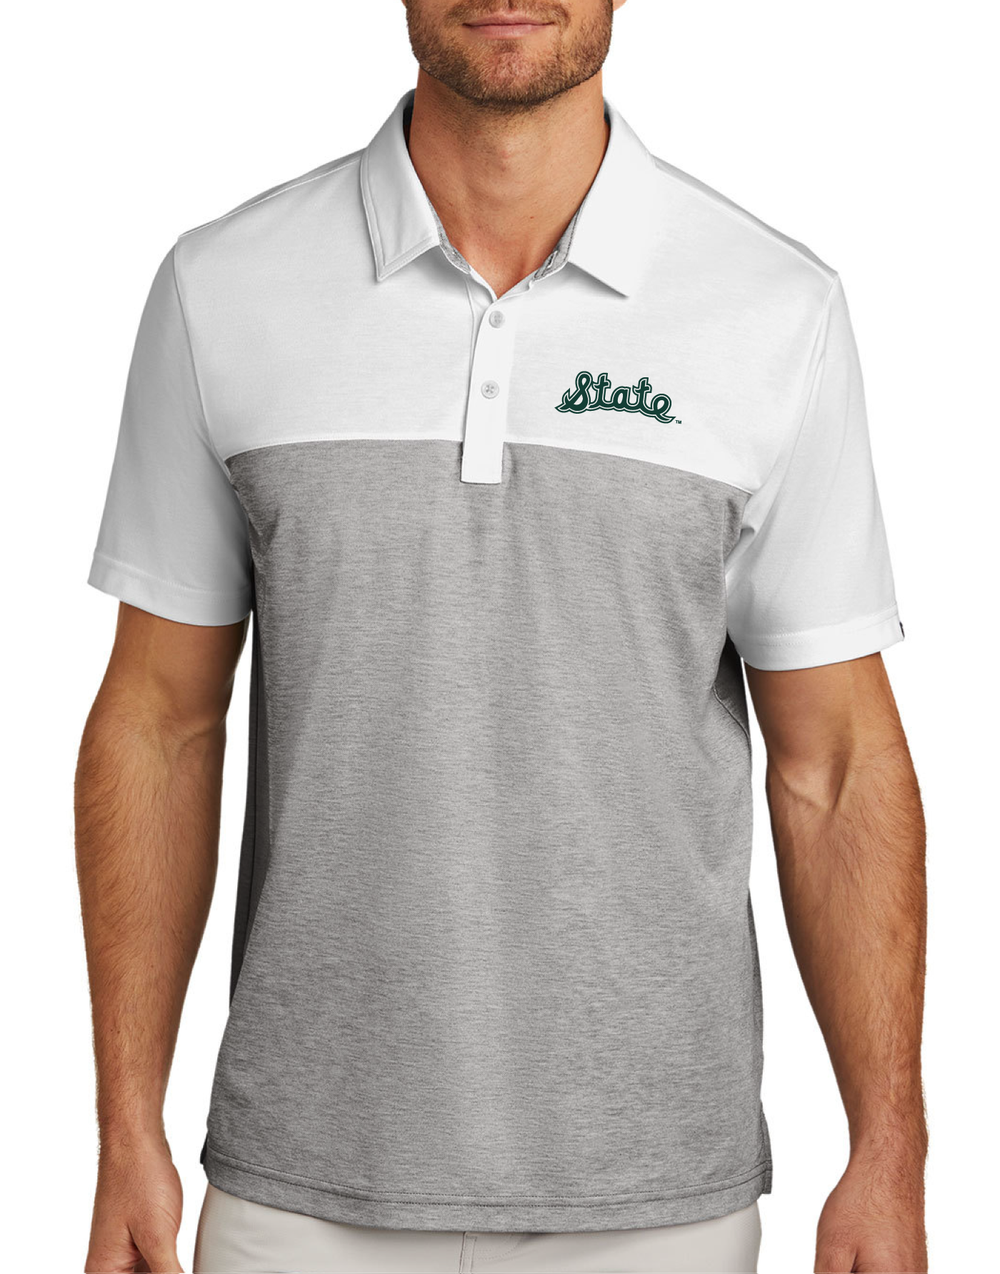 Michigan State Vintage Polo with Cursive State logo